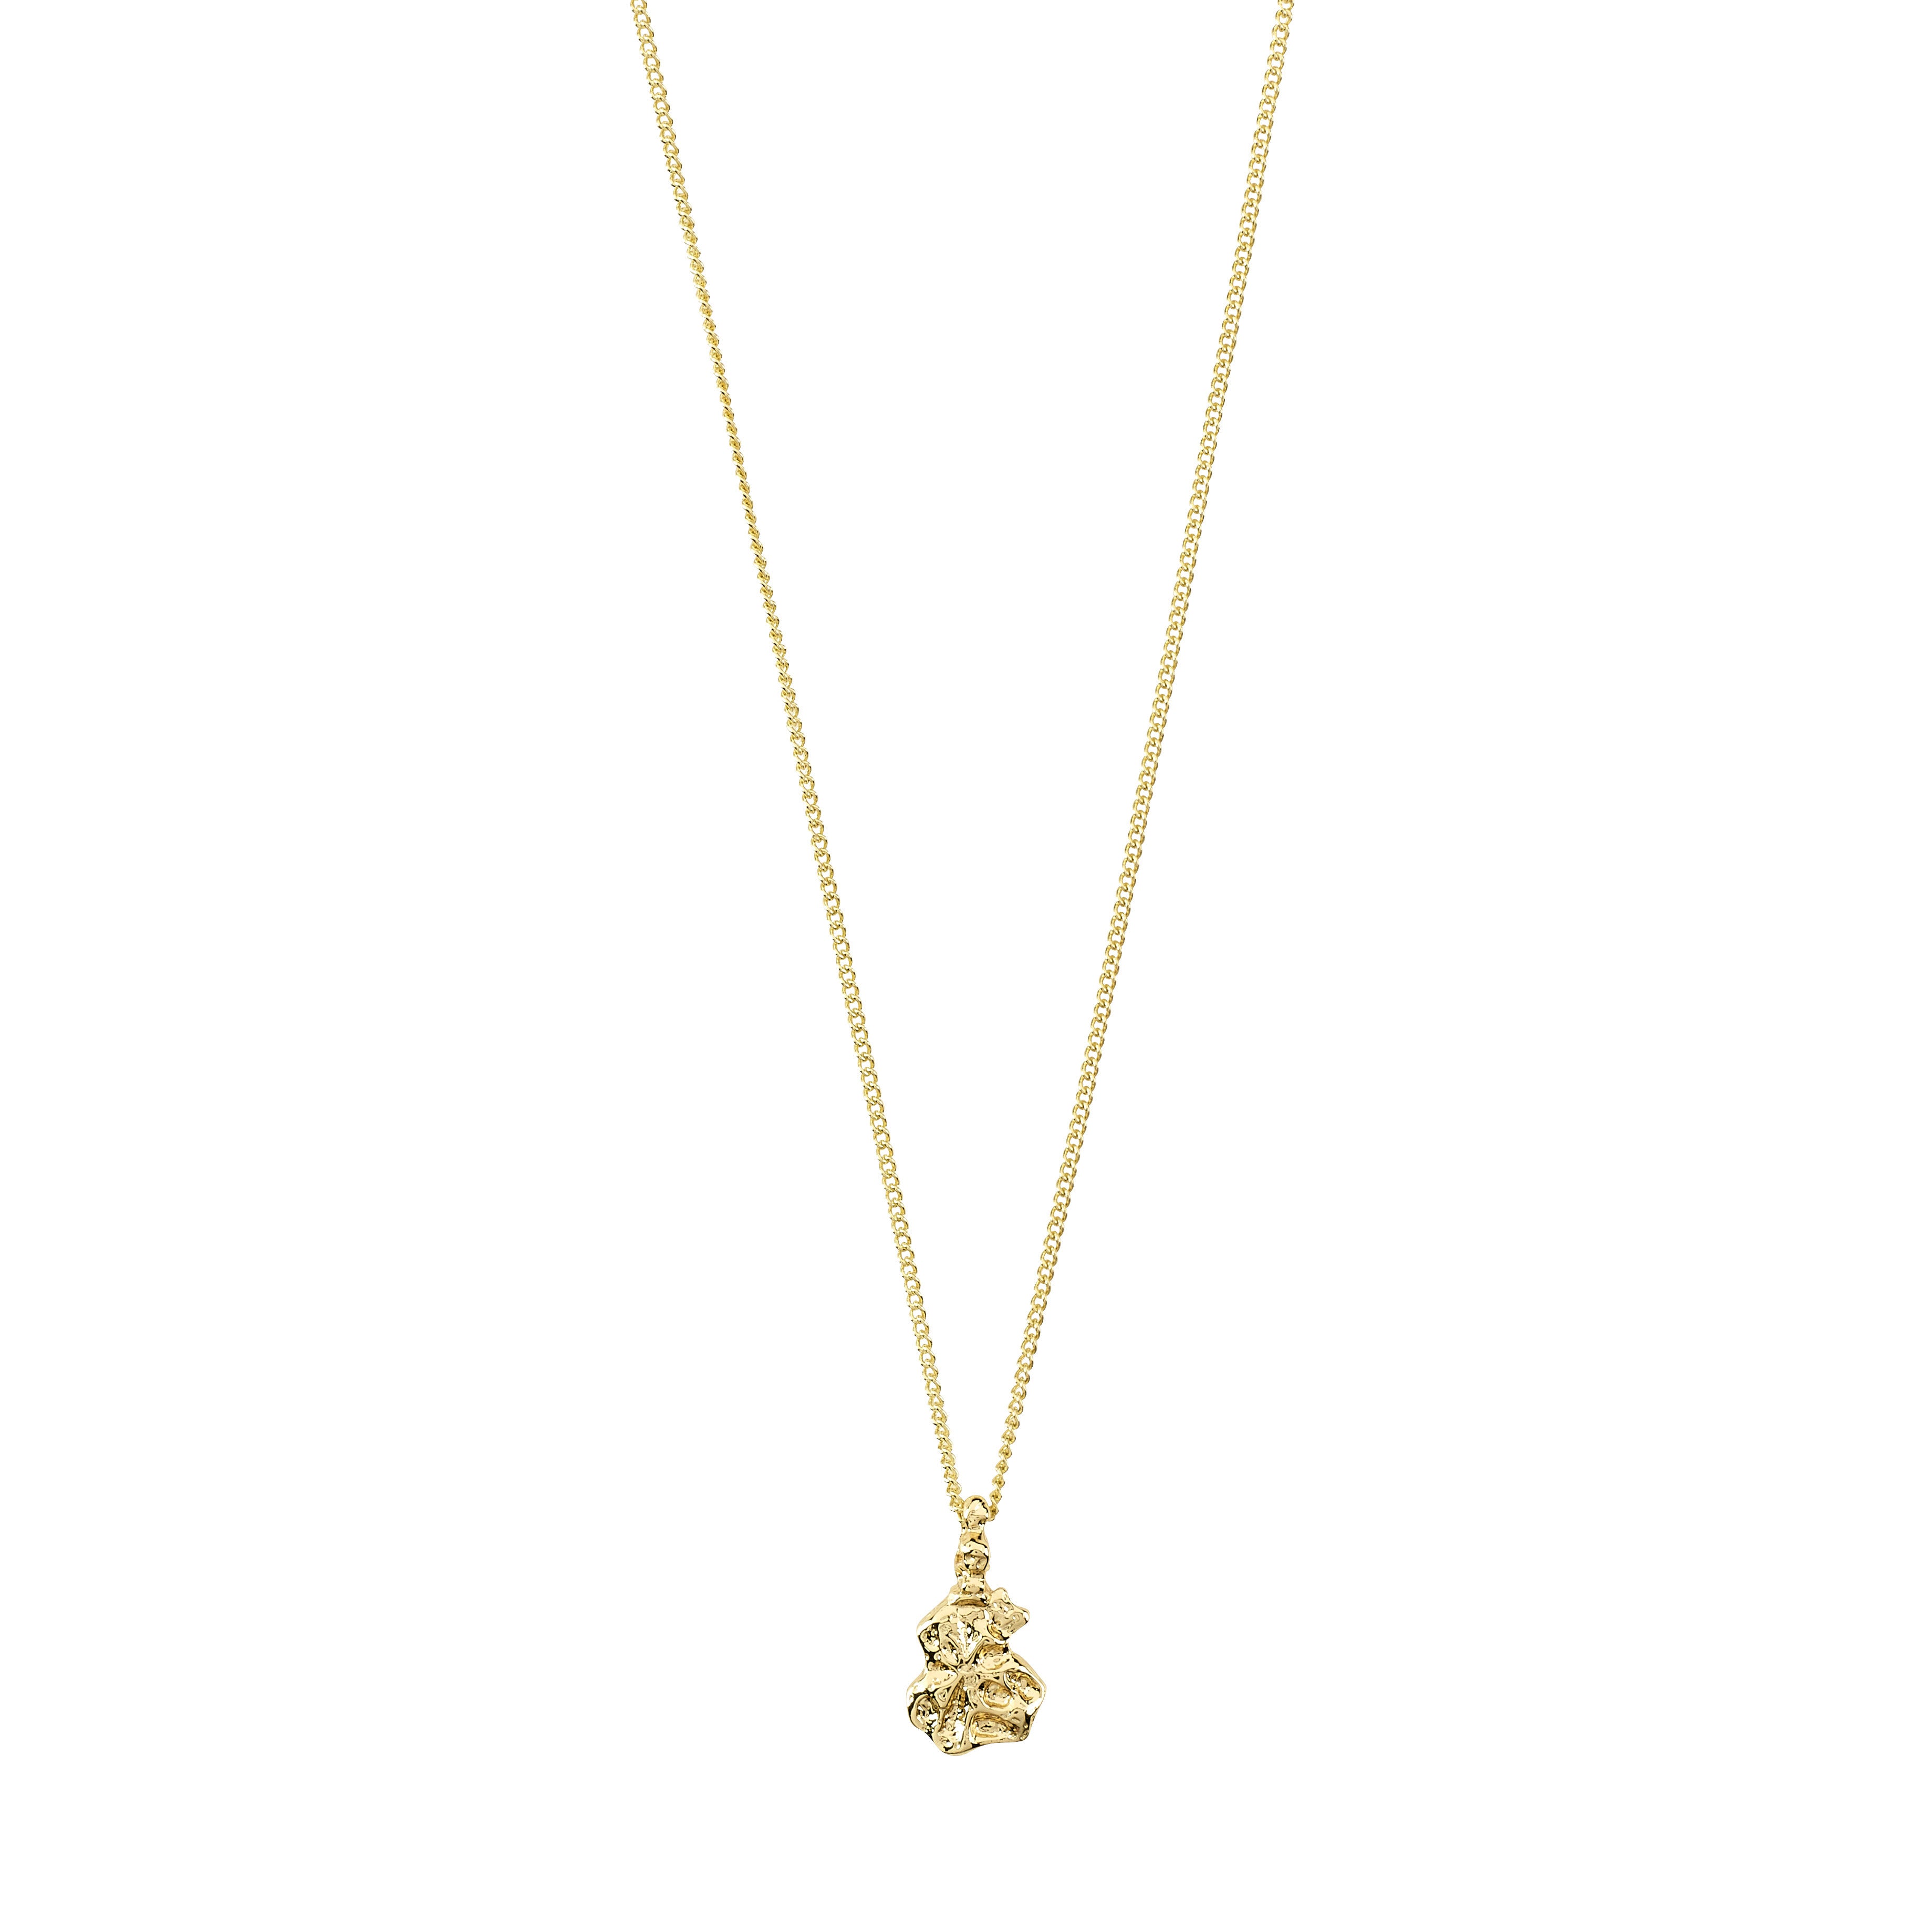 CARLA recycled pendant necklace gold-plated